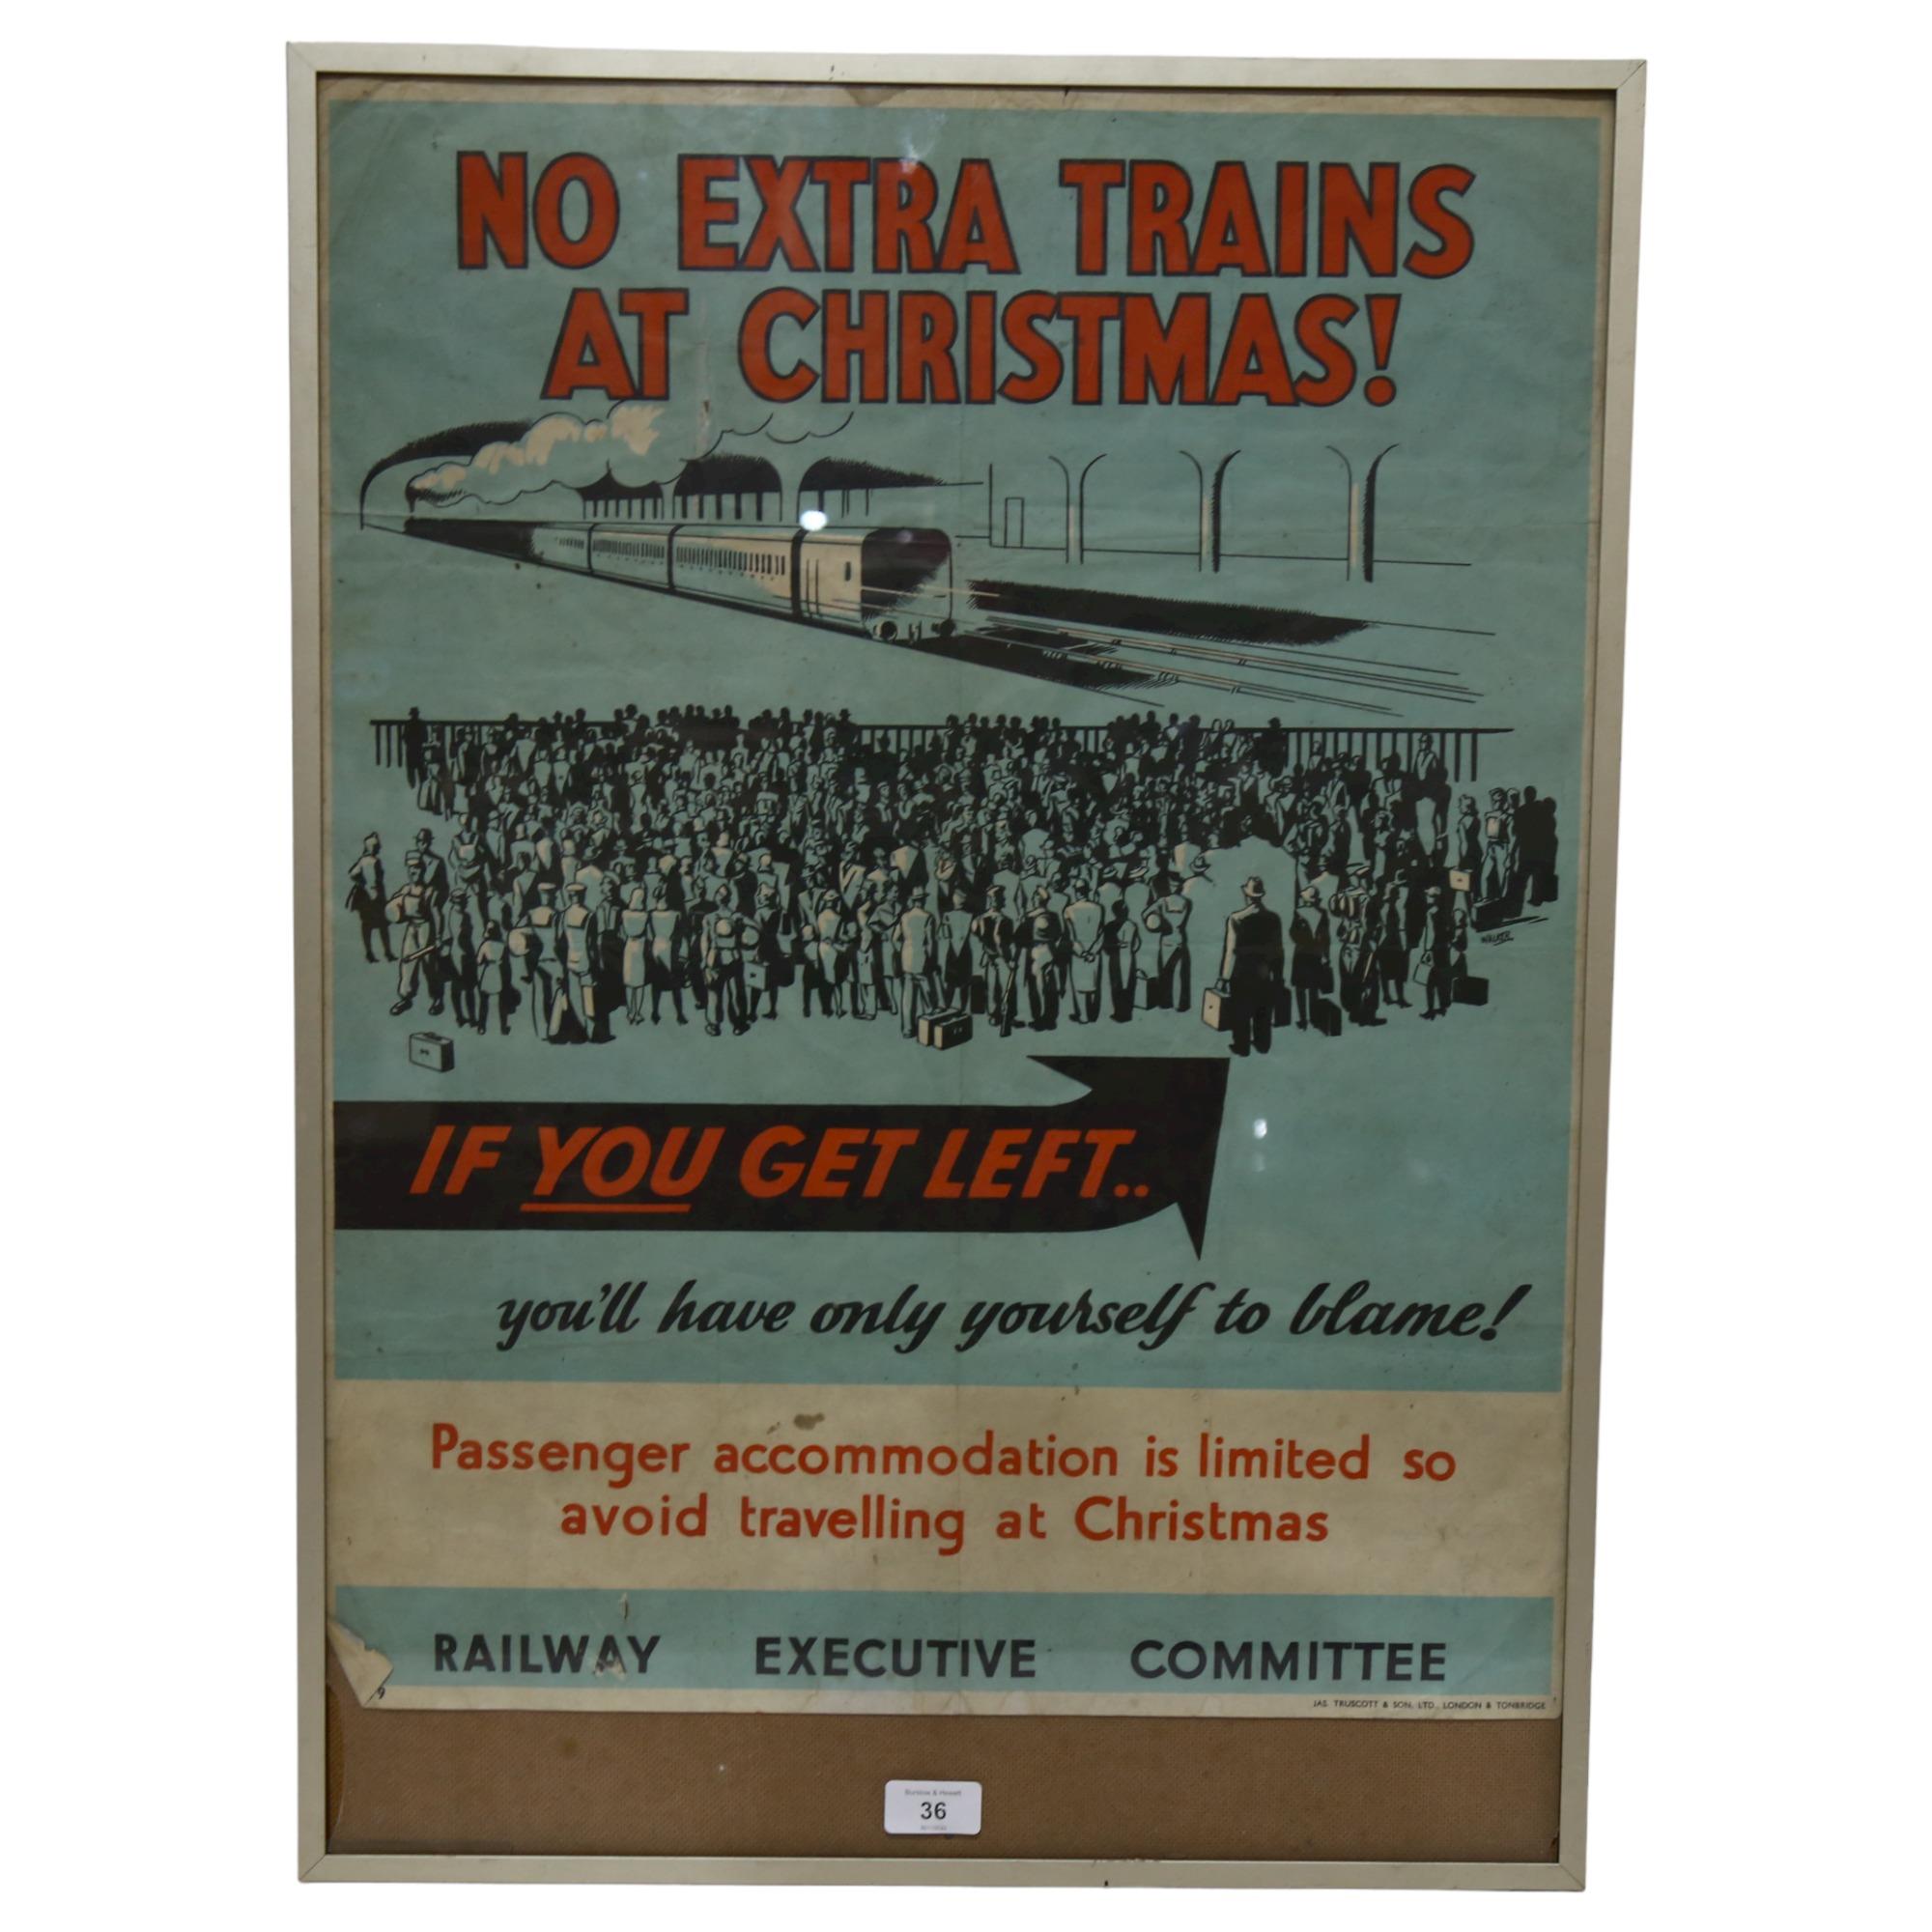 An early 20th century railway poster "No Extra Trains At Christmas" if you get left you'll have only